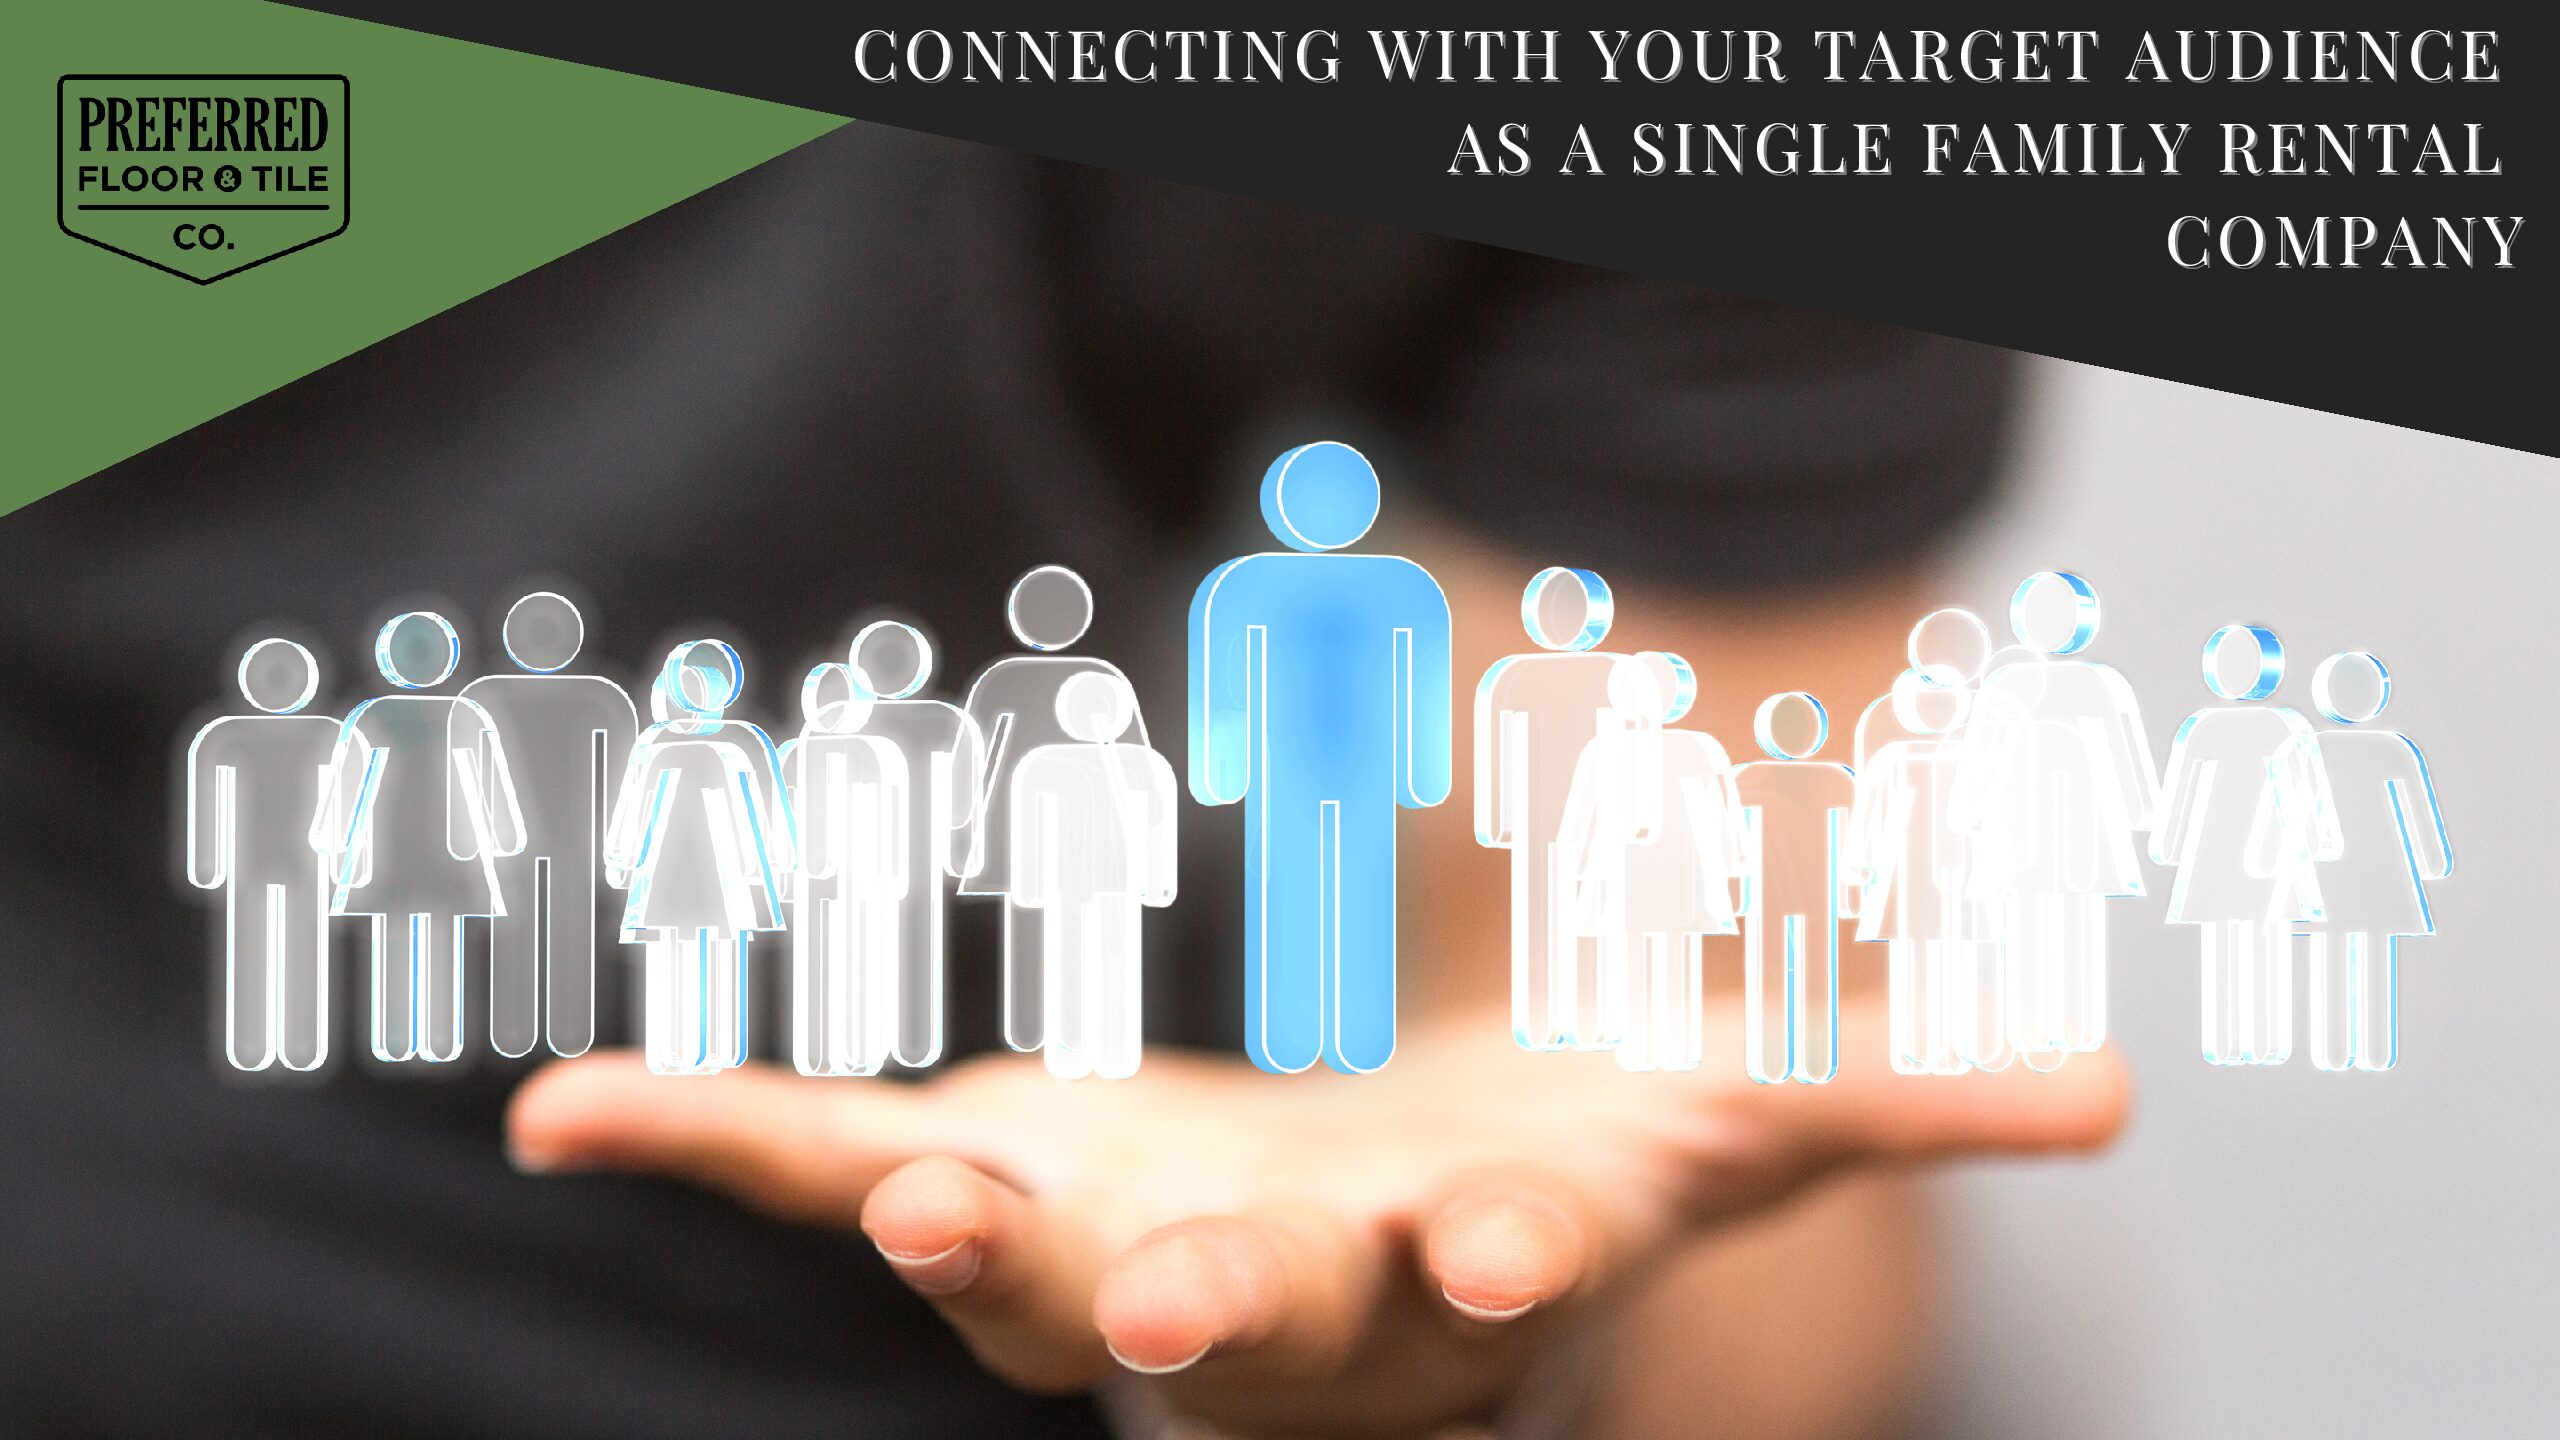 Connecting with Your Target Audience as a Single Family Rental Company